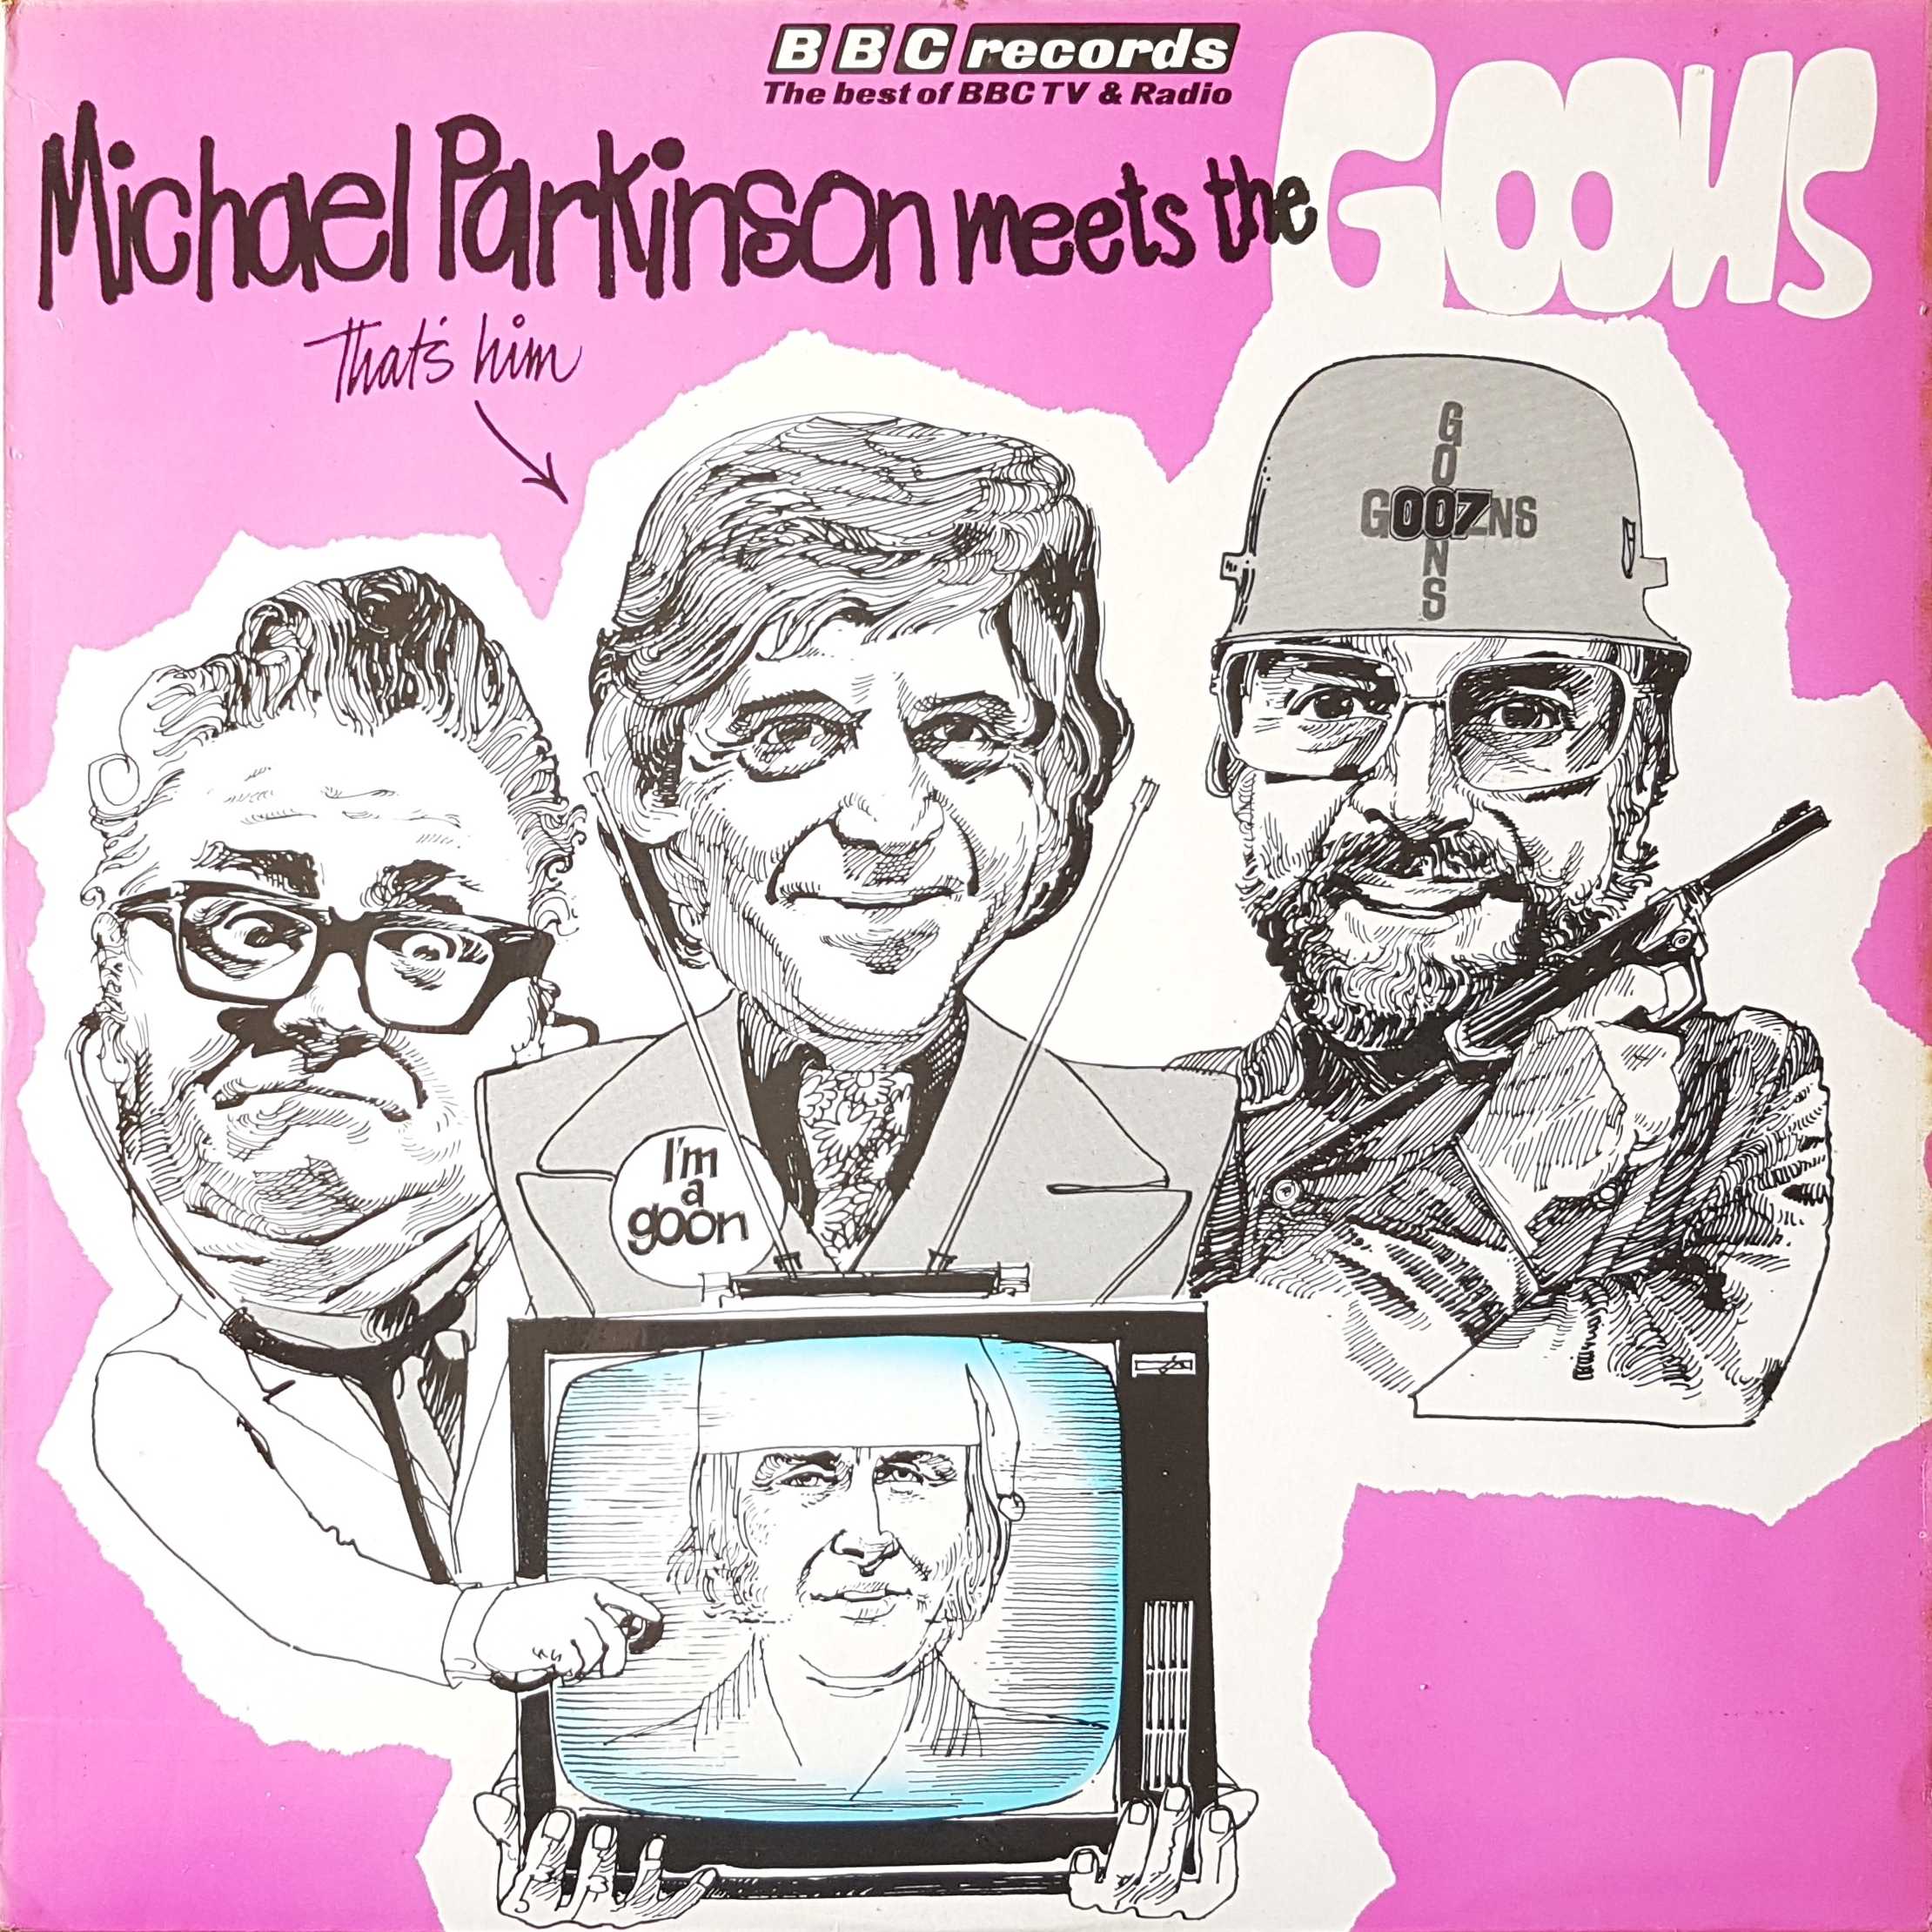 Picture of REB 165 Parkinson meets the Goons by artist Michael Parkinson from the BBC albums - Records and Tapes library